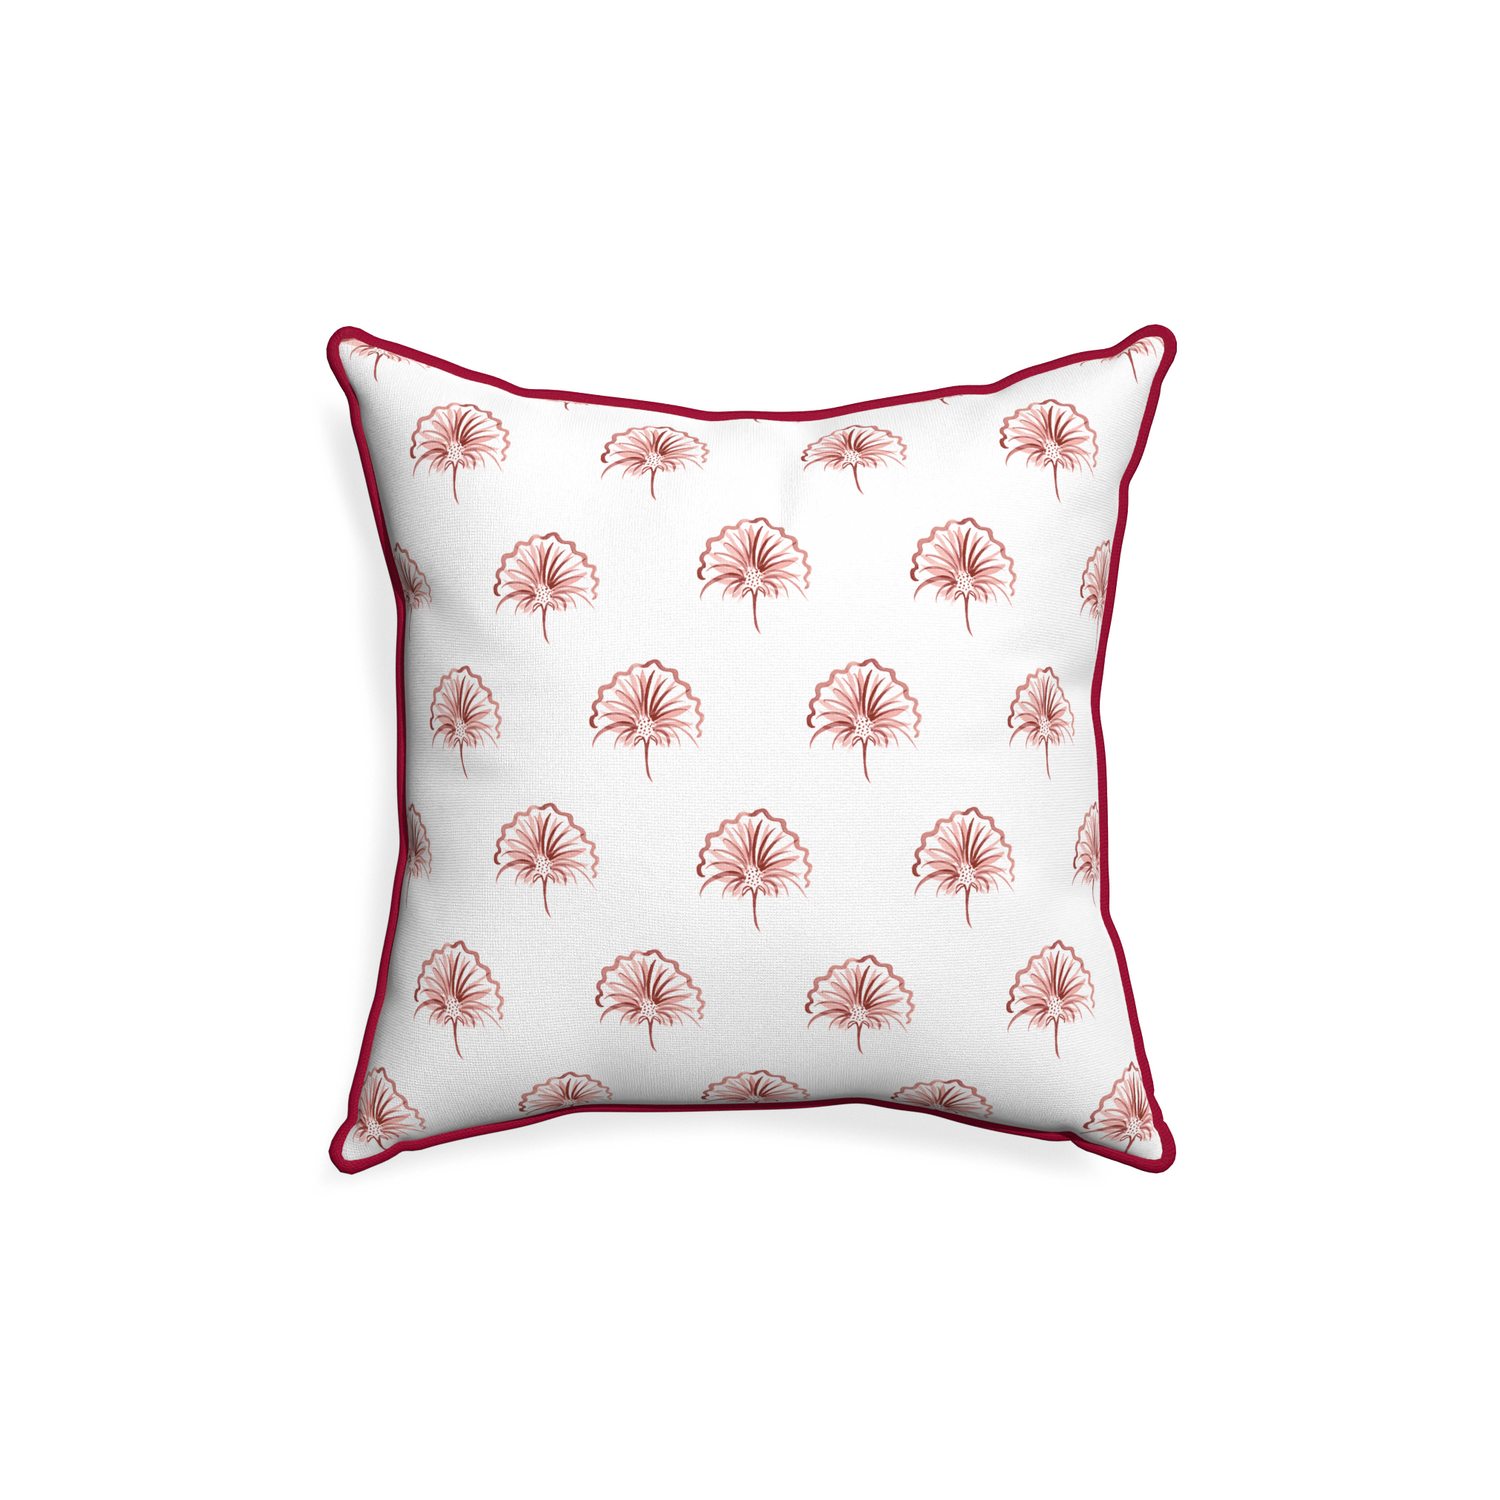 18-square penelope rose custom floral pinkpillow with raspberry piping on white background